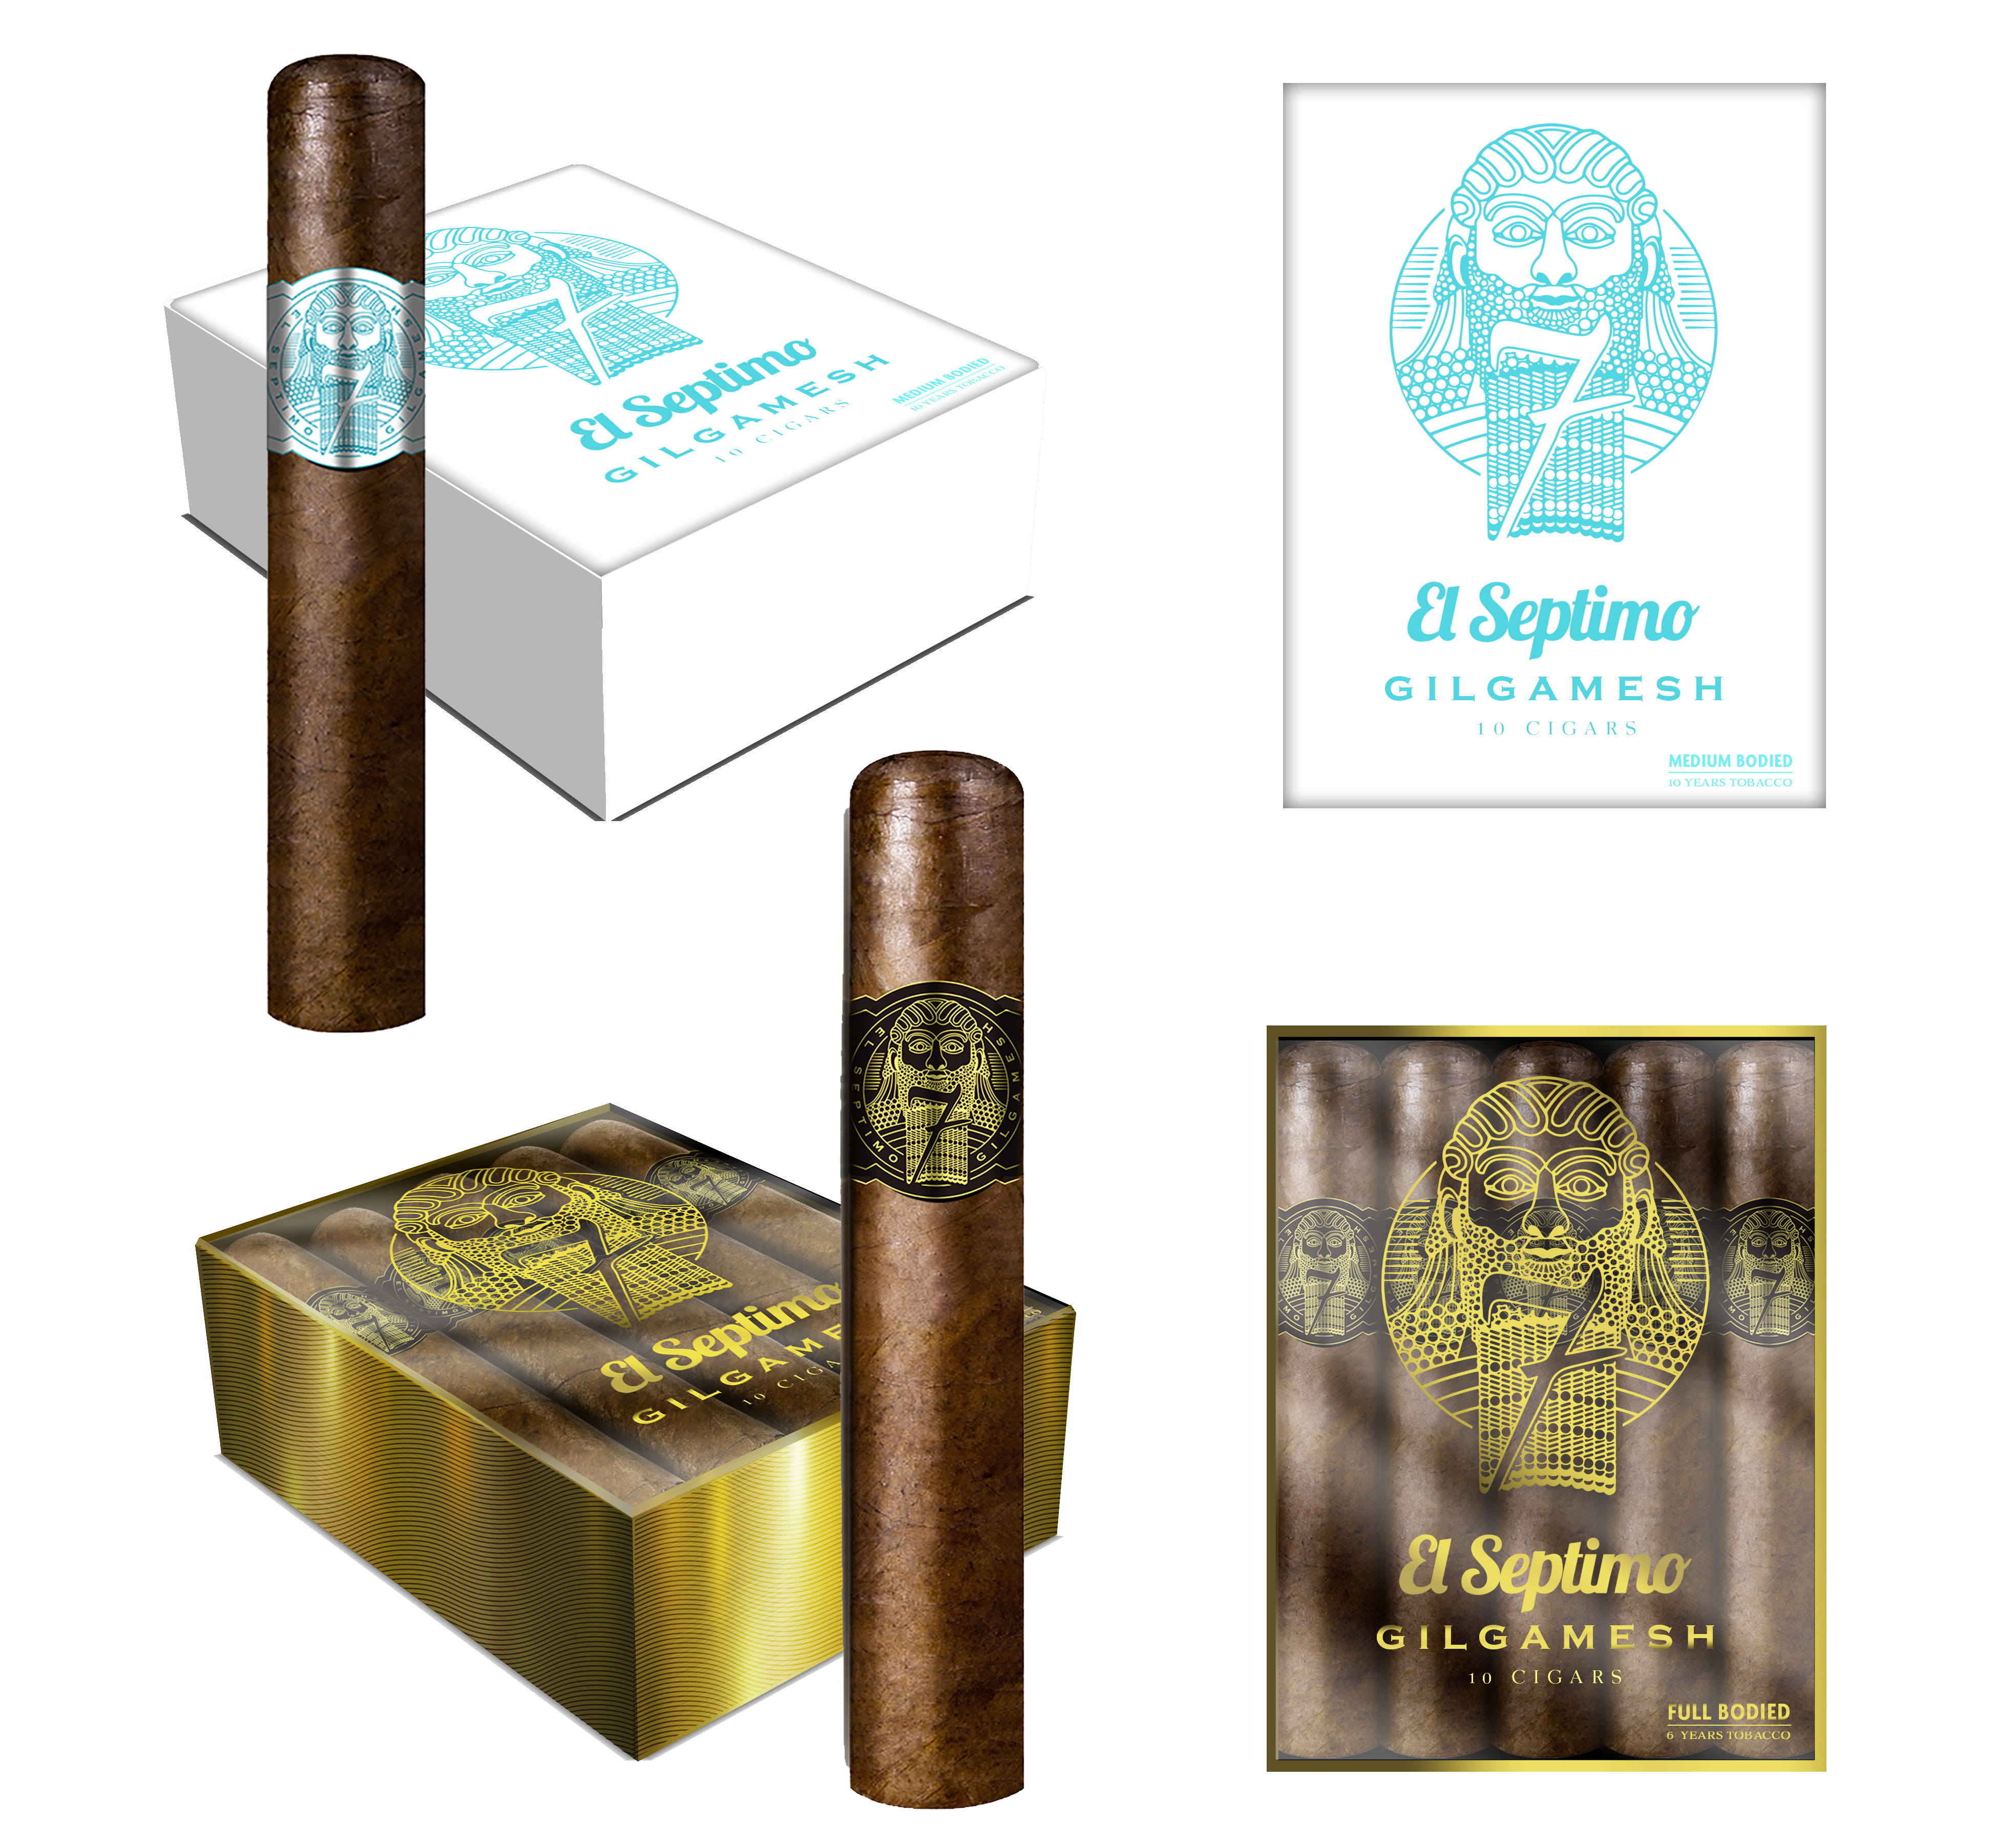 The Gilgamesh Collection initially will offer the cigars in medium and full-bodied strengths, each possessing a milder light-up due to the distance of the heat being further away from the palate.